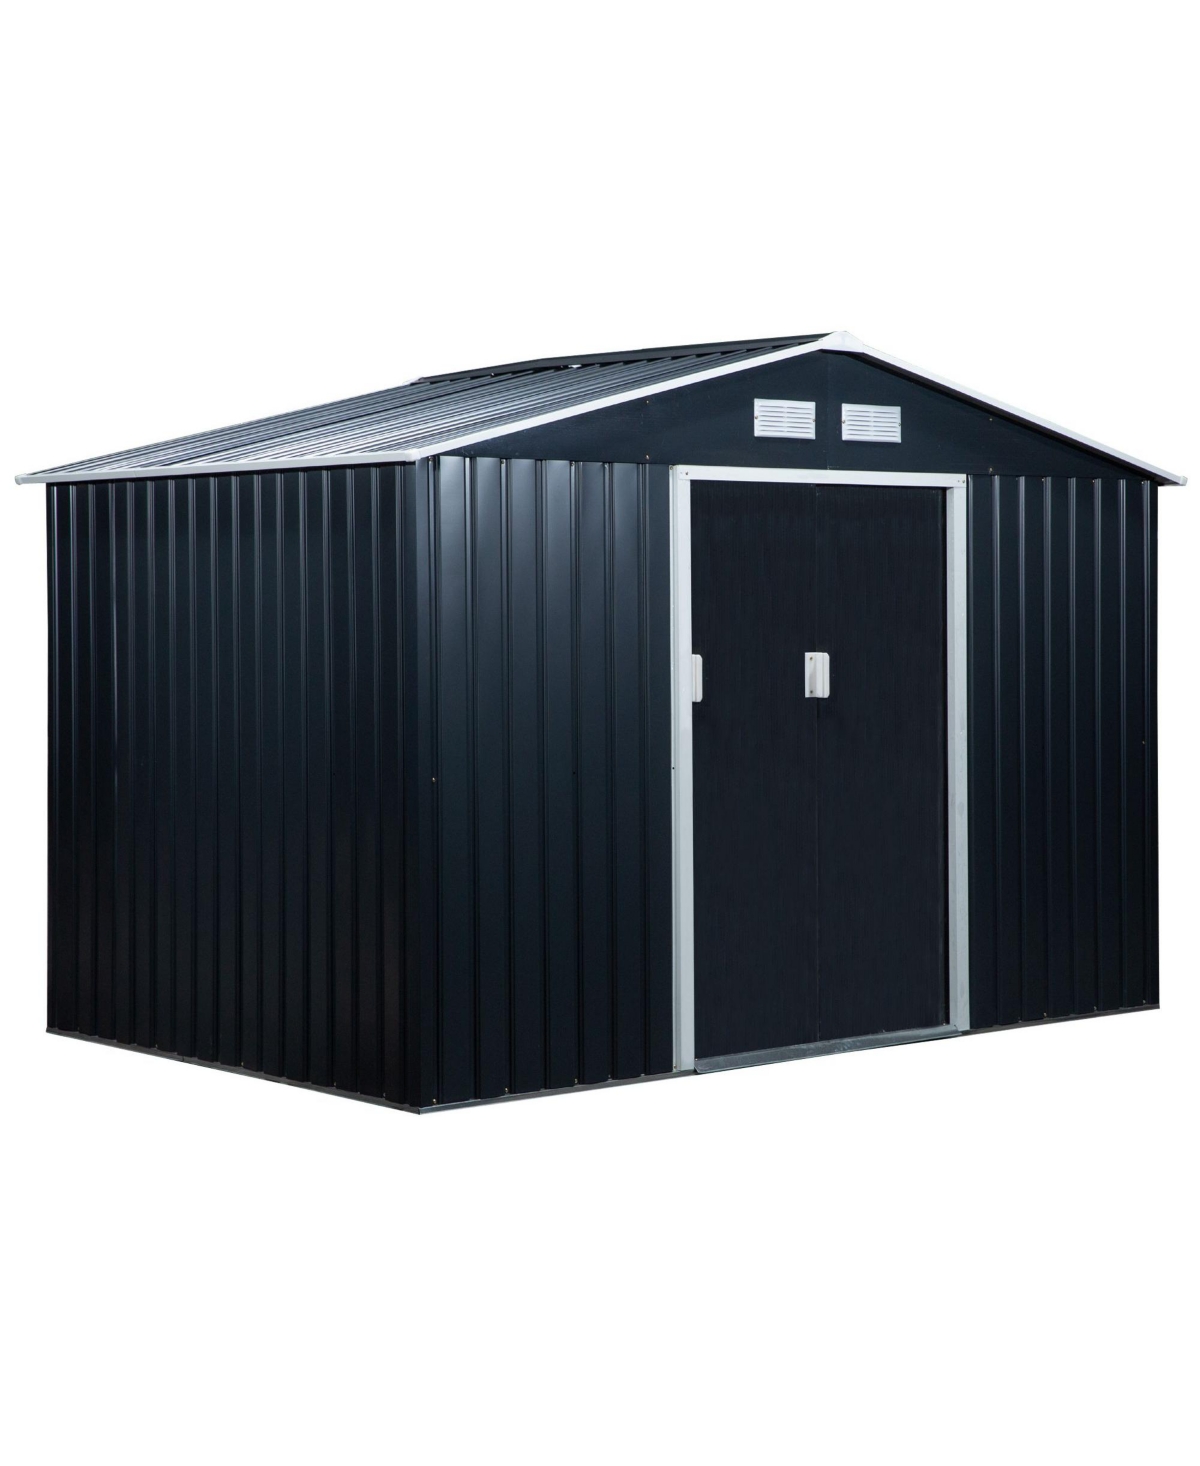 9' x 6' Metal Storage Shed Garden Tool House with Double Sliding Doors, 4 Air Vents for Backyard, Patio, Lawn Dark Grey - Dark Grey